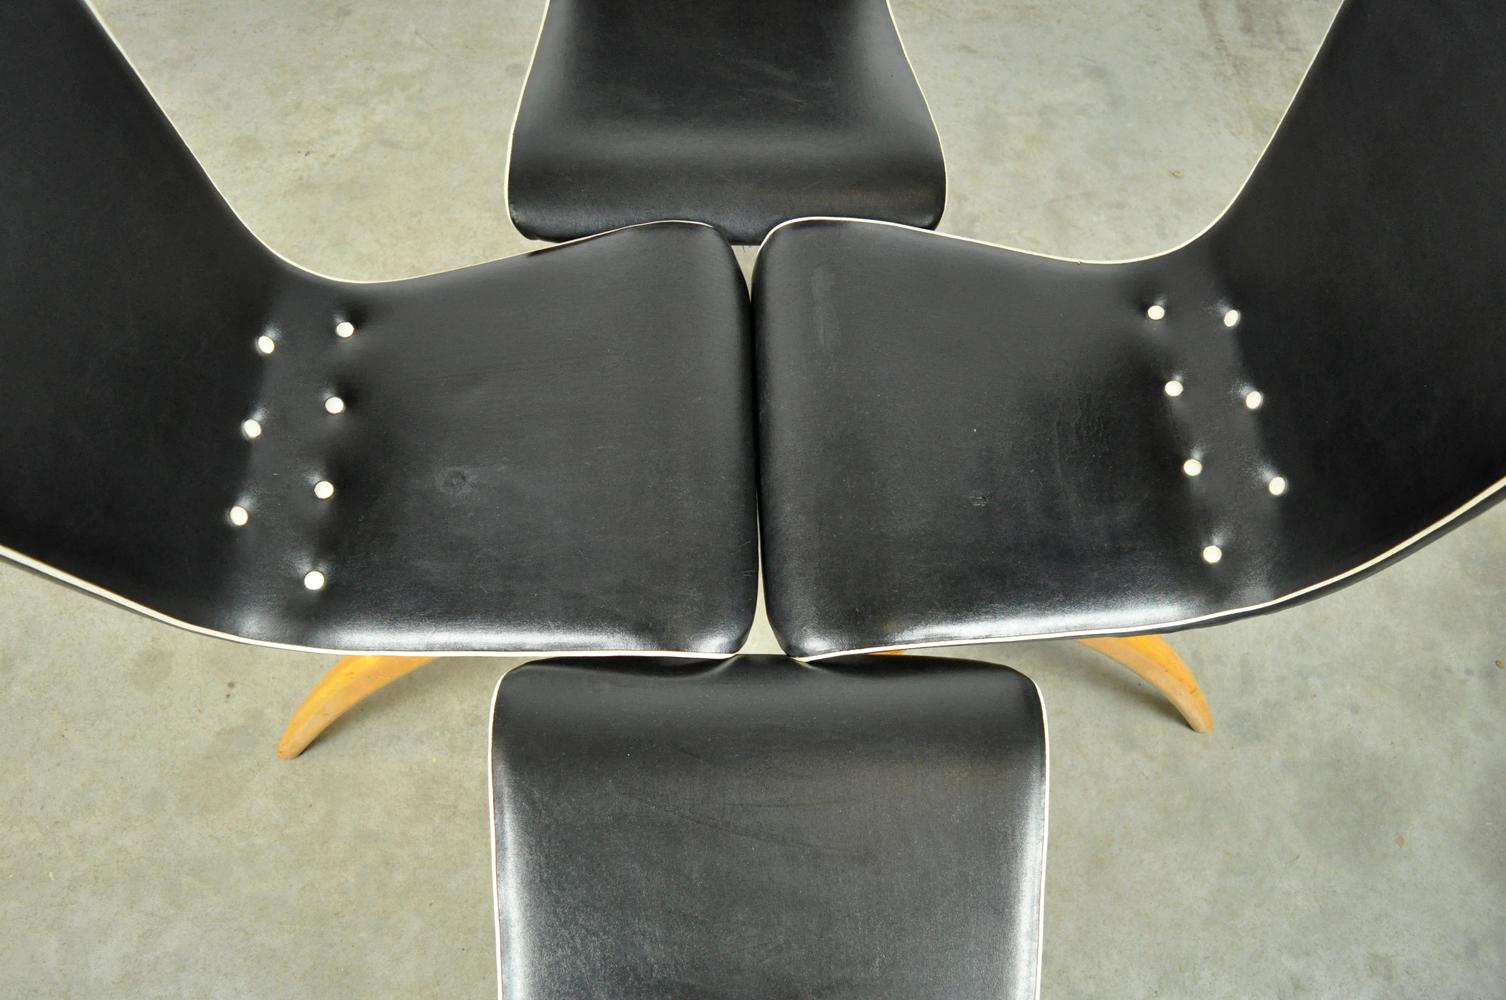 Set wingback dining chairs (4) by G.J. van Os for van Os Culemborg, 1950s For Sale 2